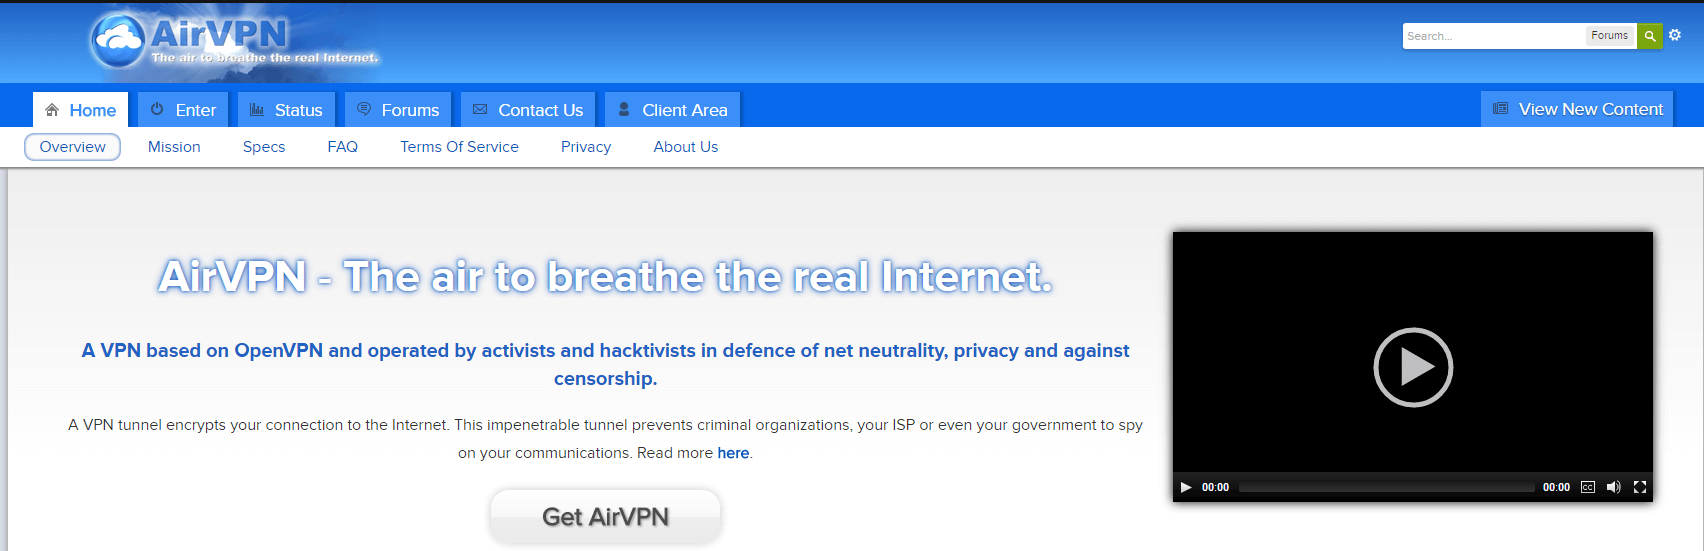 AirVPN Is Well-Known, But Should You Use Them?